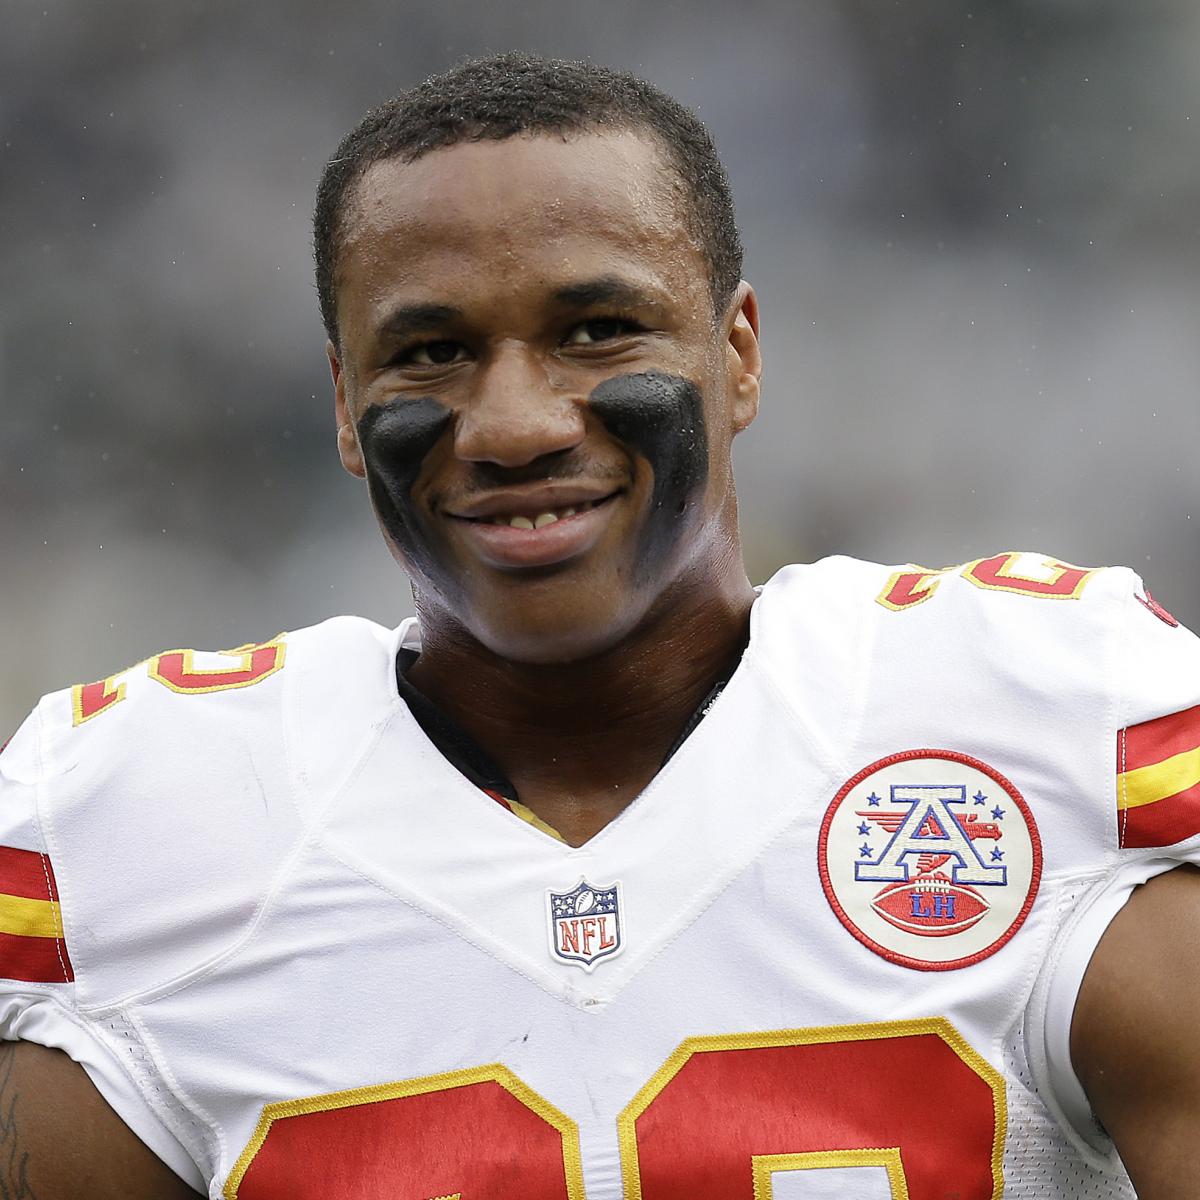 Marcus Peters Named 2015 AP Defensive Rookie of the Year Details and